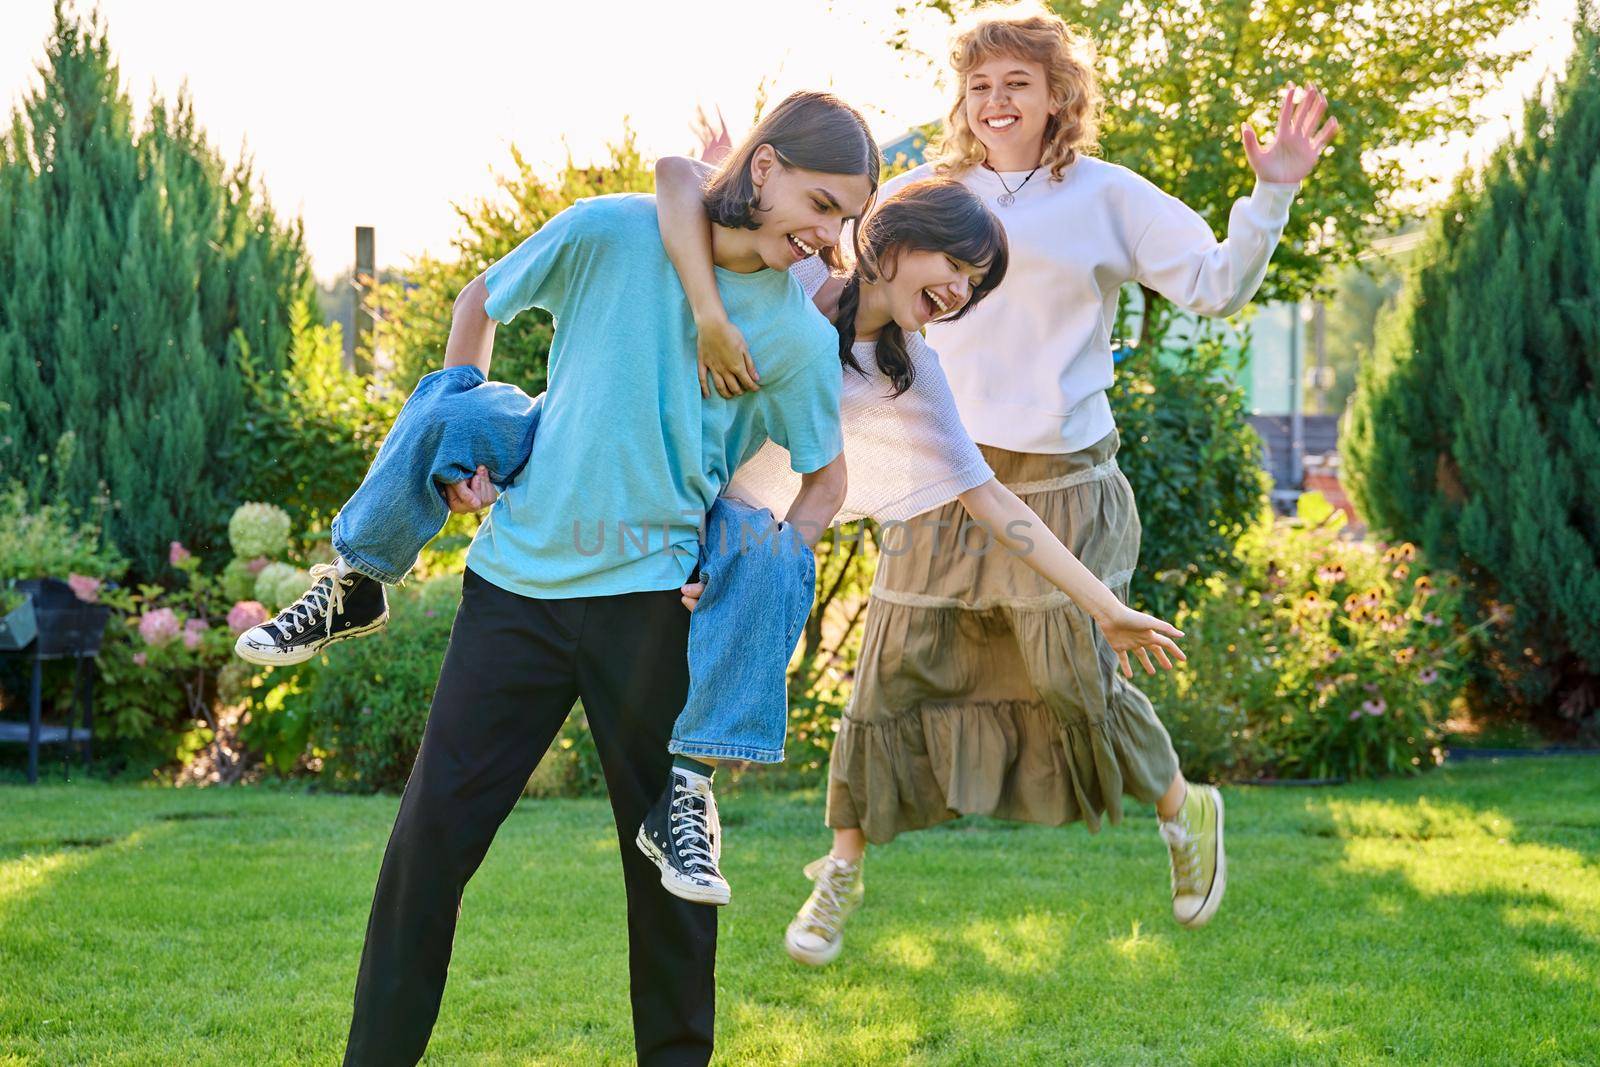 Three teenage friends having fun outdoor, sunny summer day on the lawn. Group of teenagers laughing together. Lifestyle, leisure, friendship, youth concept